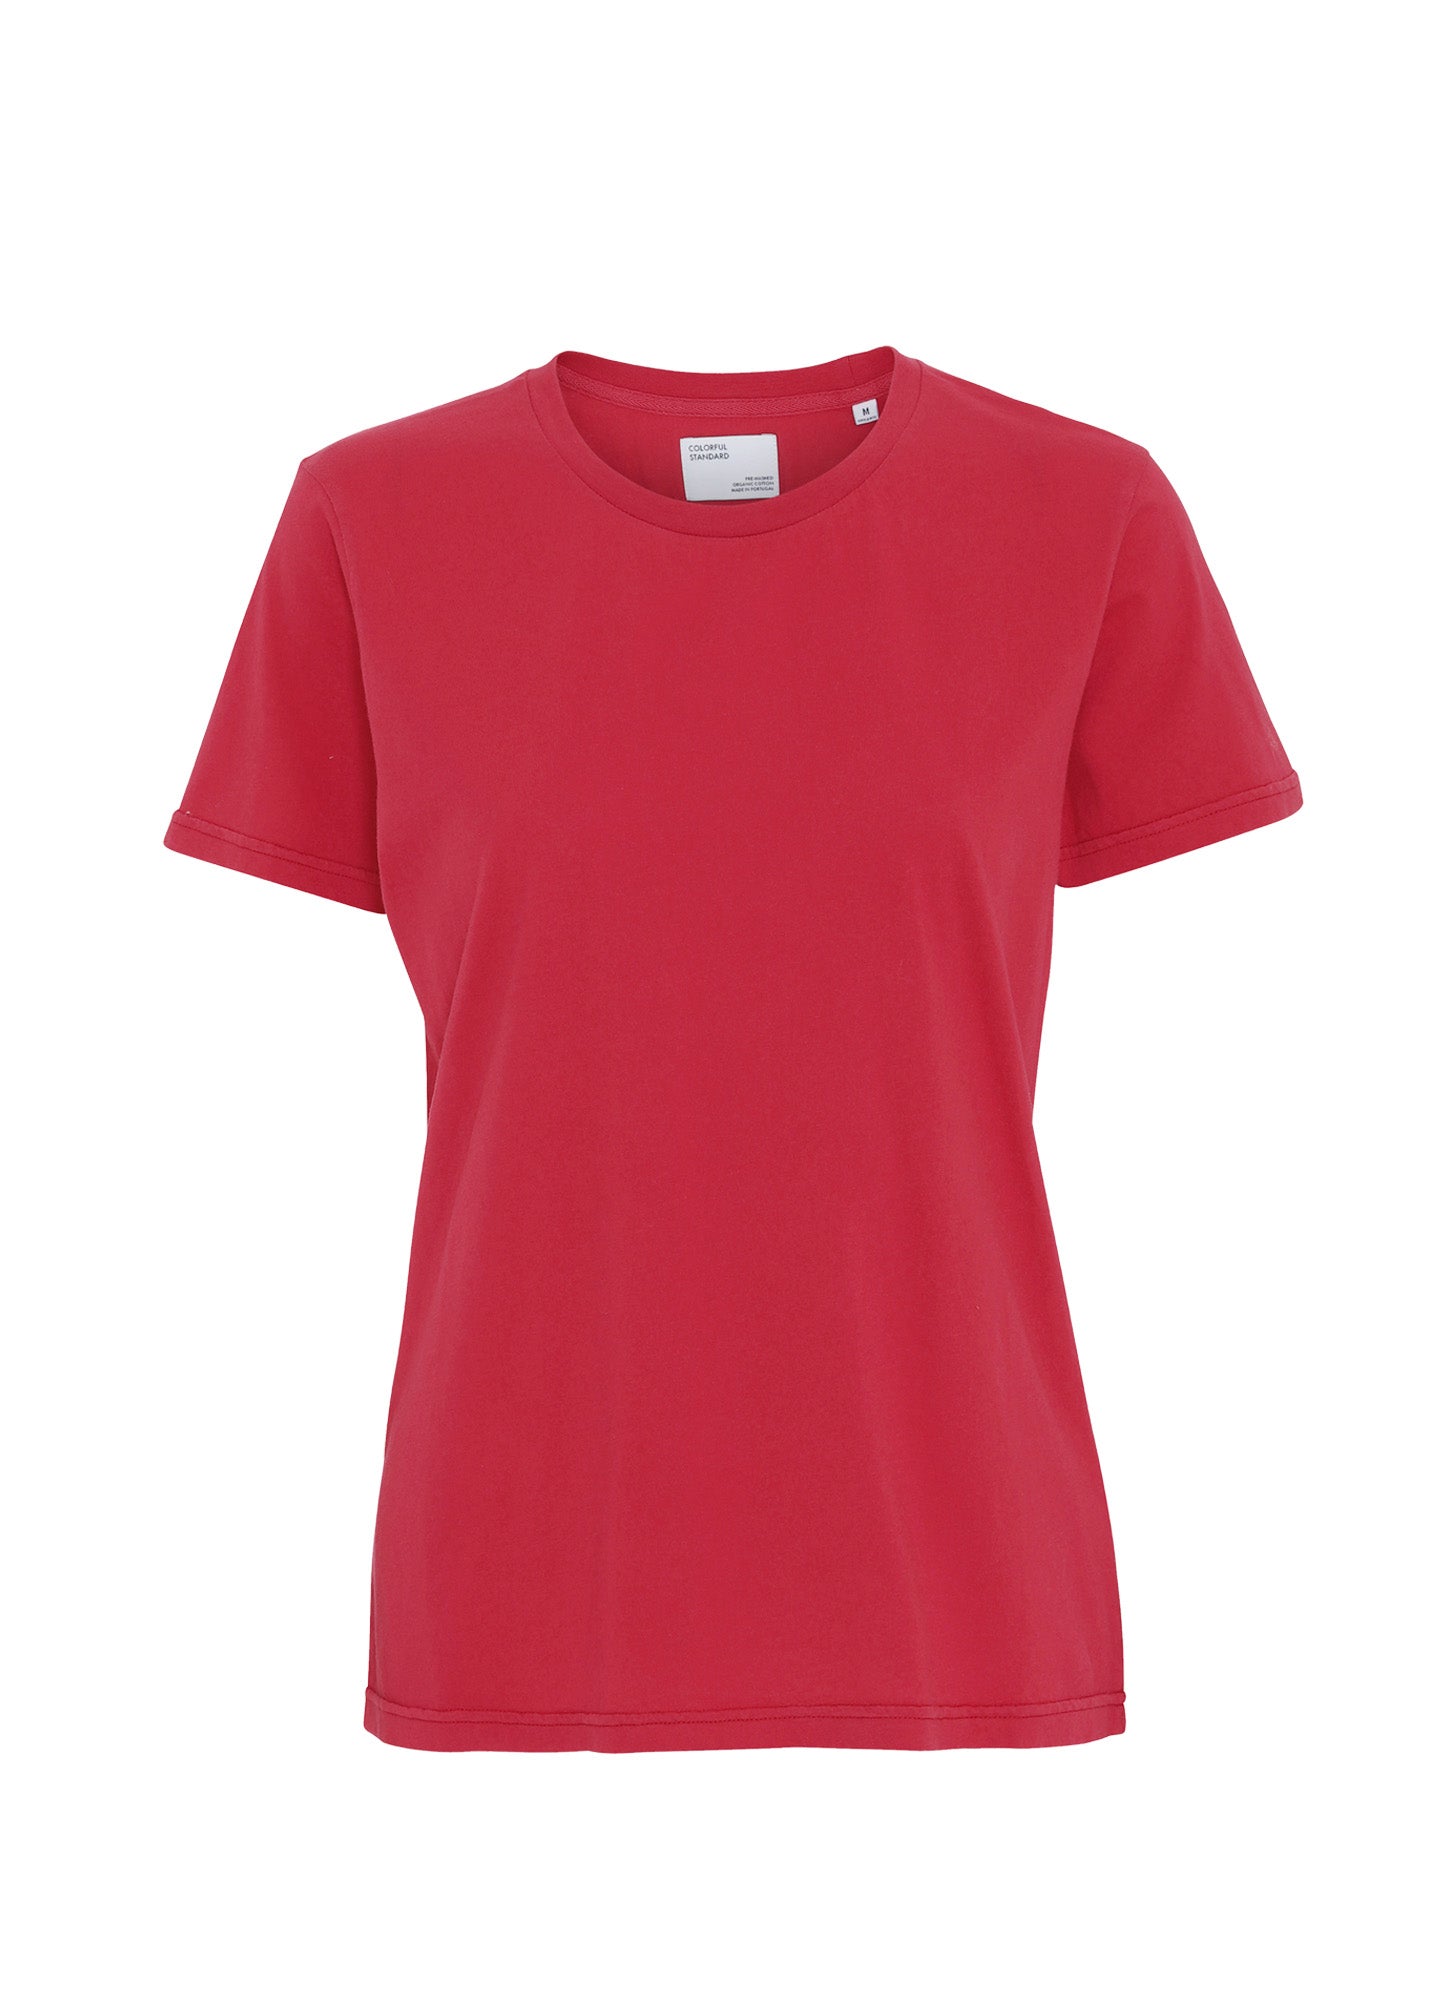 Colorful Standard Light Organic Tee - Scarlet Red